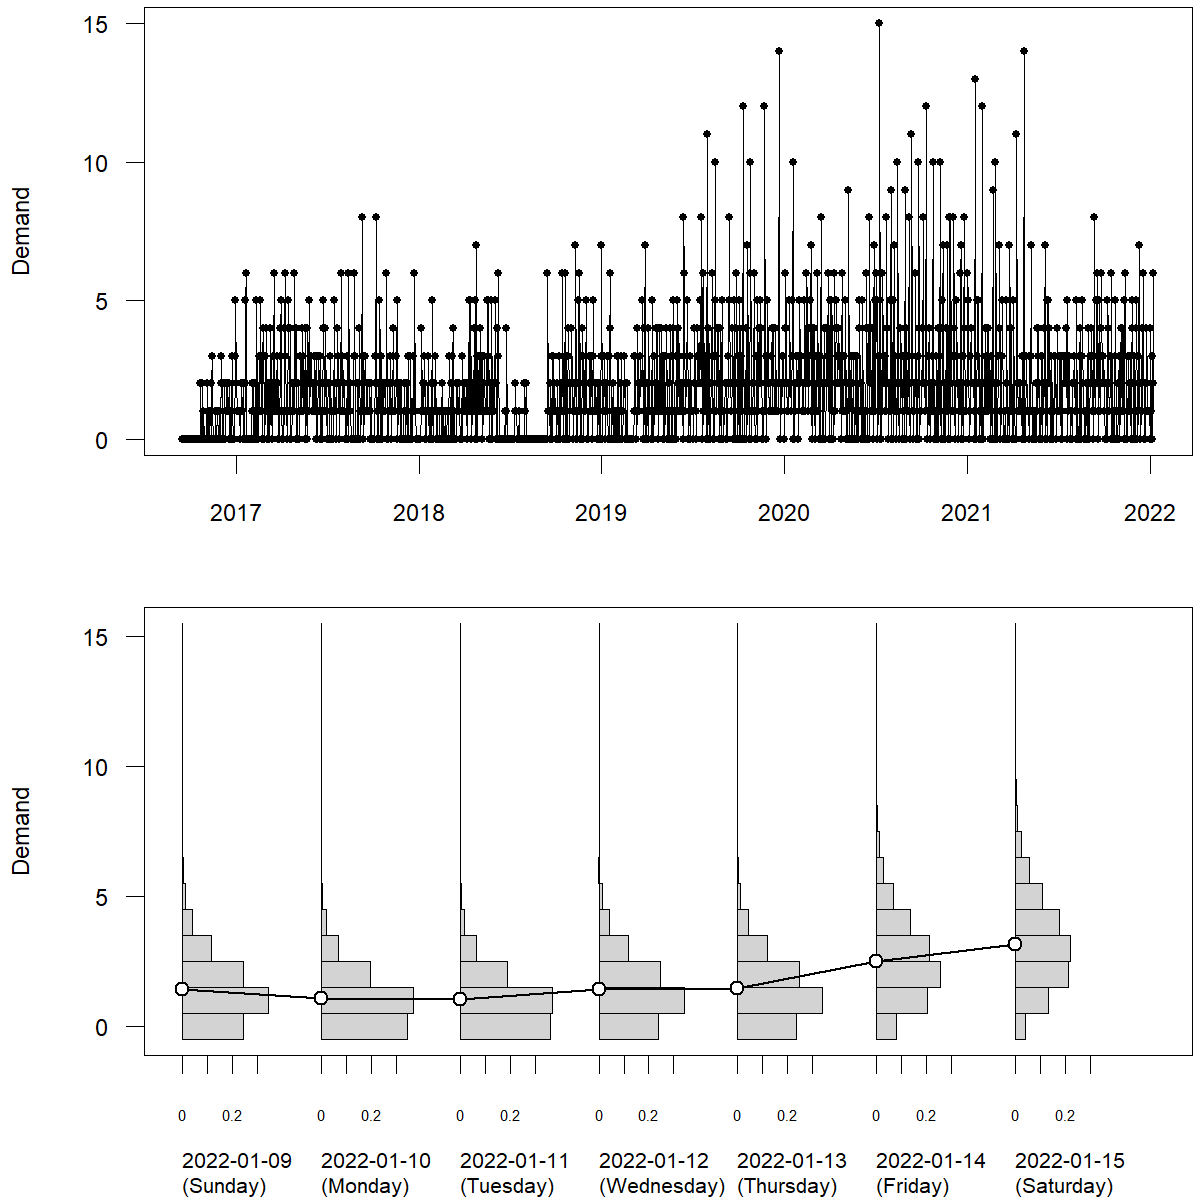 Top: a time series plot with daily demands. The horizontal axis goes from 2017 to 2022. The vertical axis is labeled "Demand" and goes from 0 to 15. Bottom: seven barplots, turned sideways and arranged horizontally, one for each of the dates from Sunday 2022-01-09 to Saturday 2022-01-15. The vertical axis is again labeled "Demand" and goes from 0 to 15. The barplots give predictive densities for the next seven days' forecasts. A dot-and-line plot gives the expectation forecasts for these seven days.